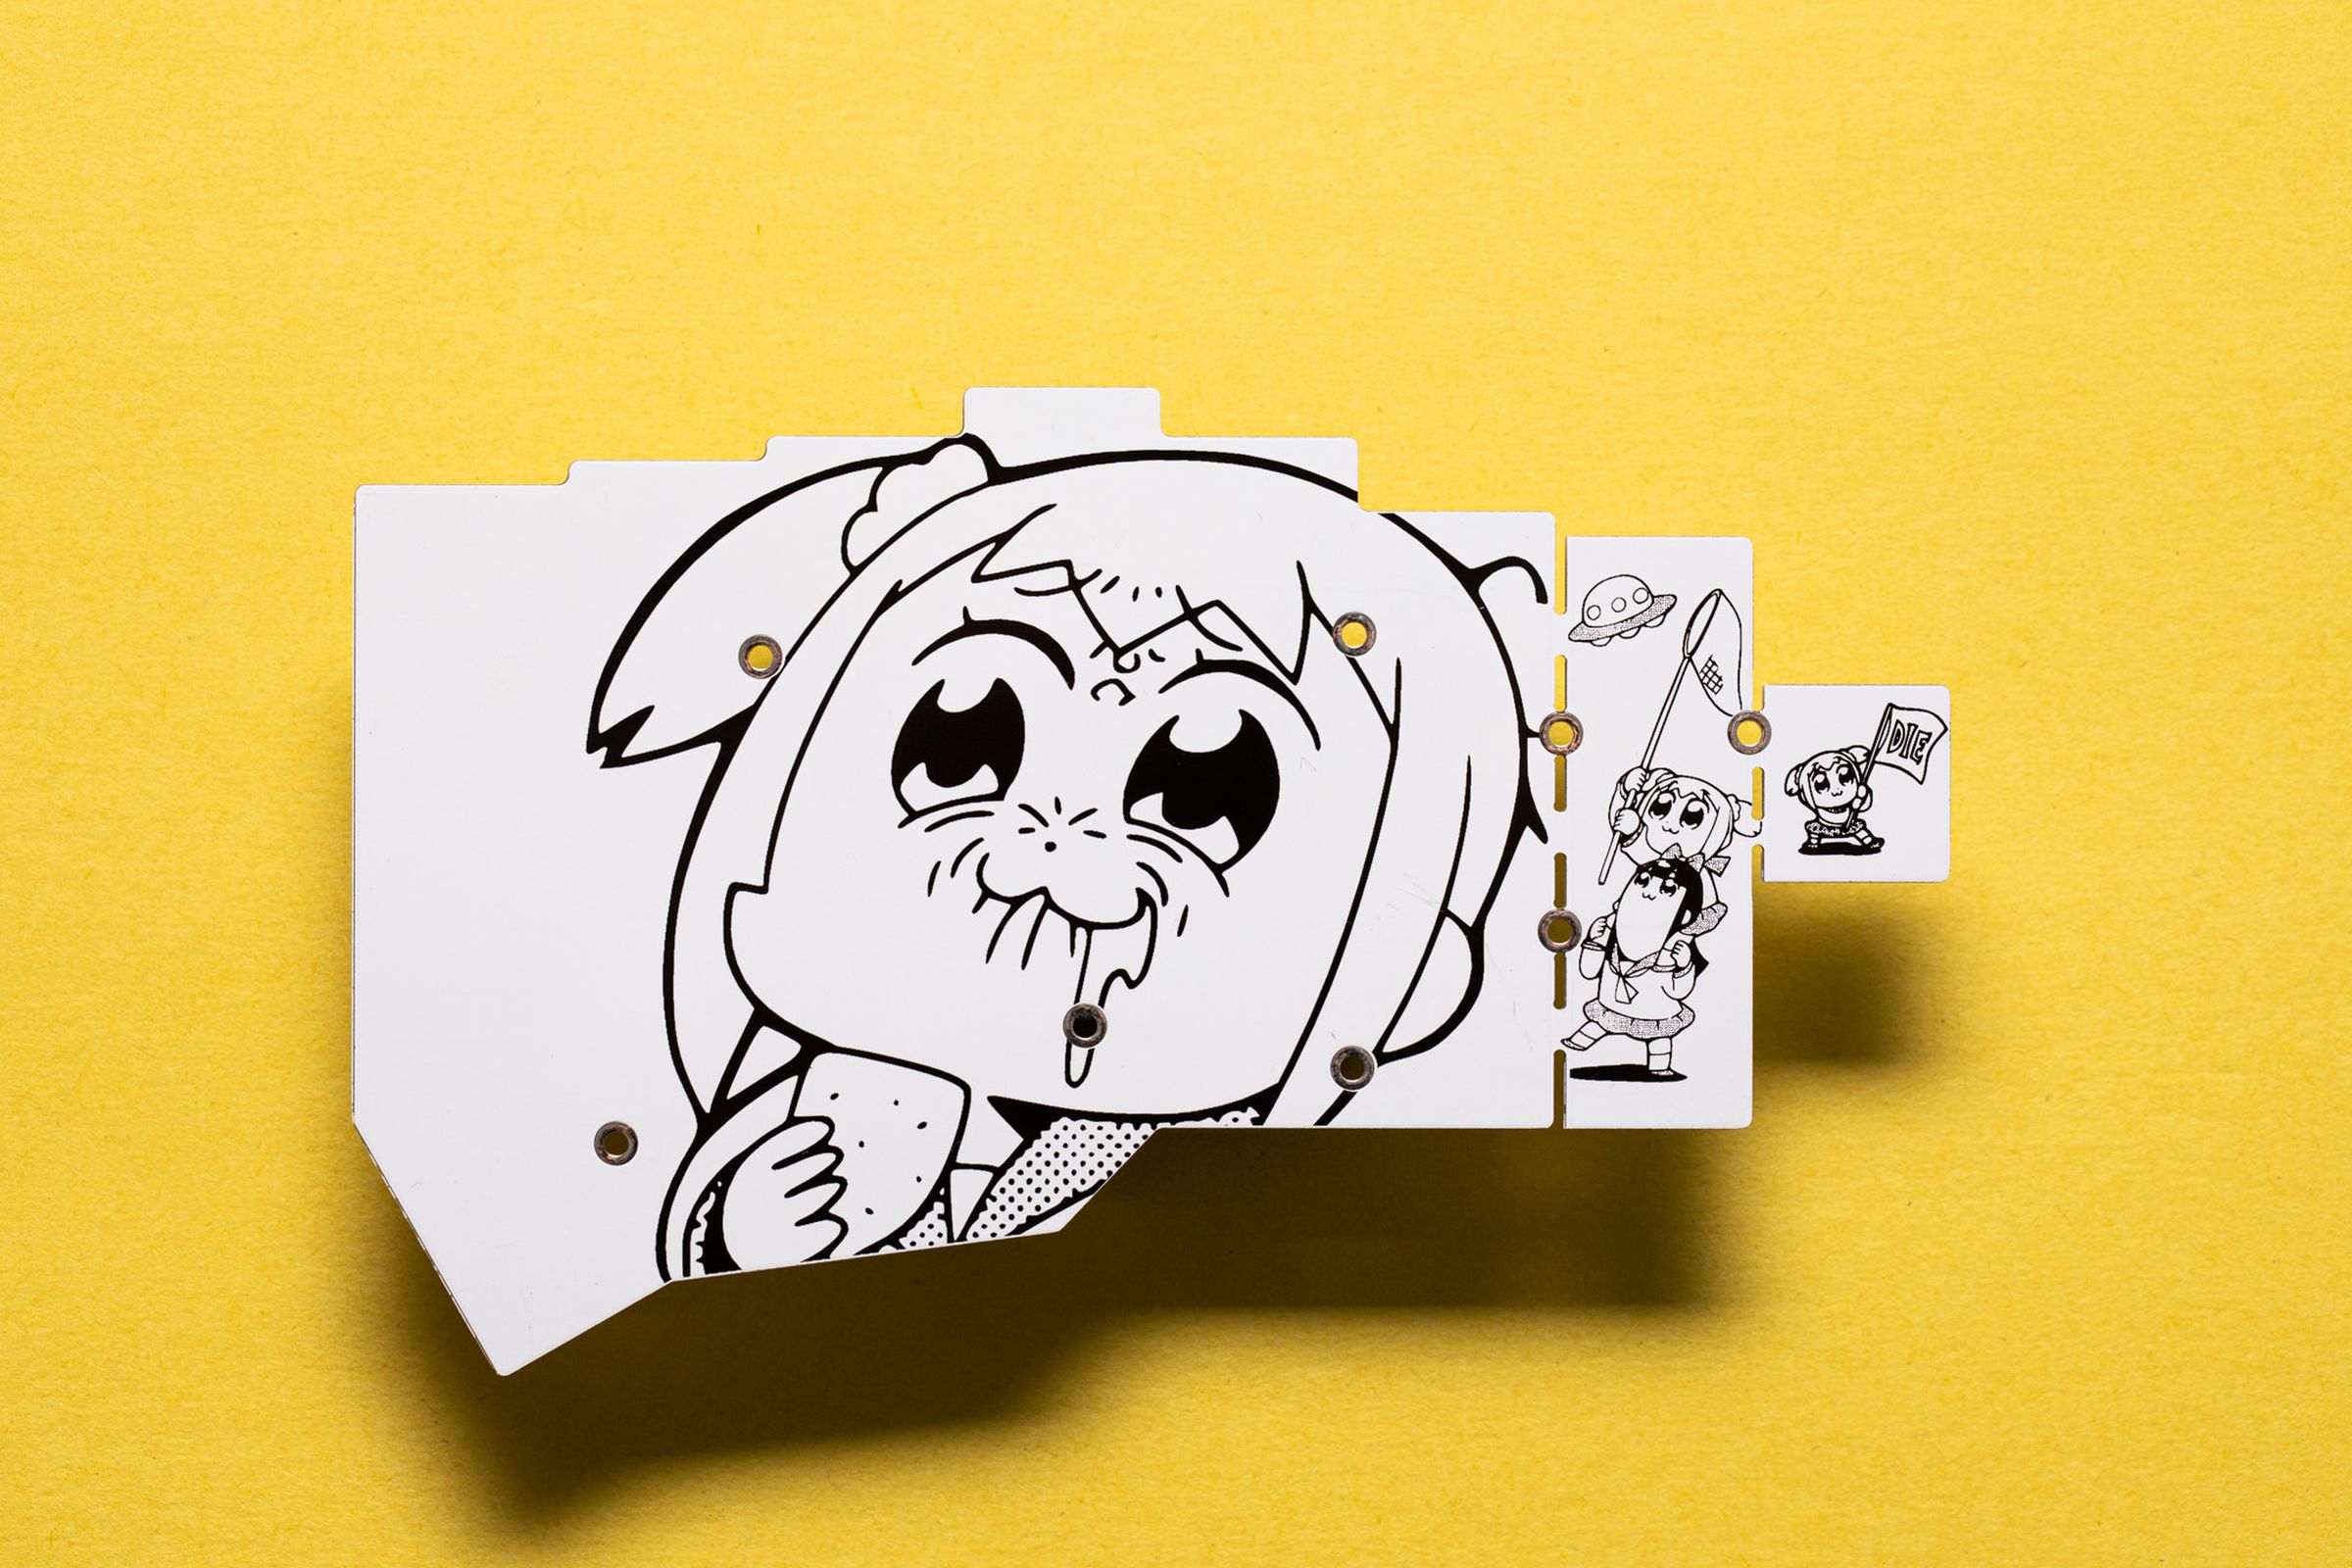 Image of a board that has Popuko from Pop Team Epic on it.